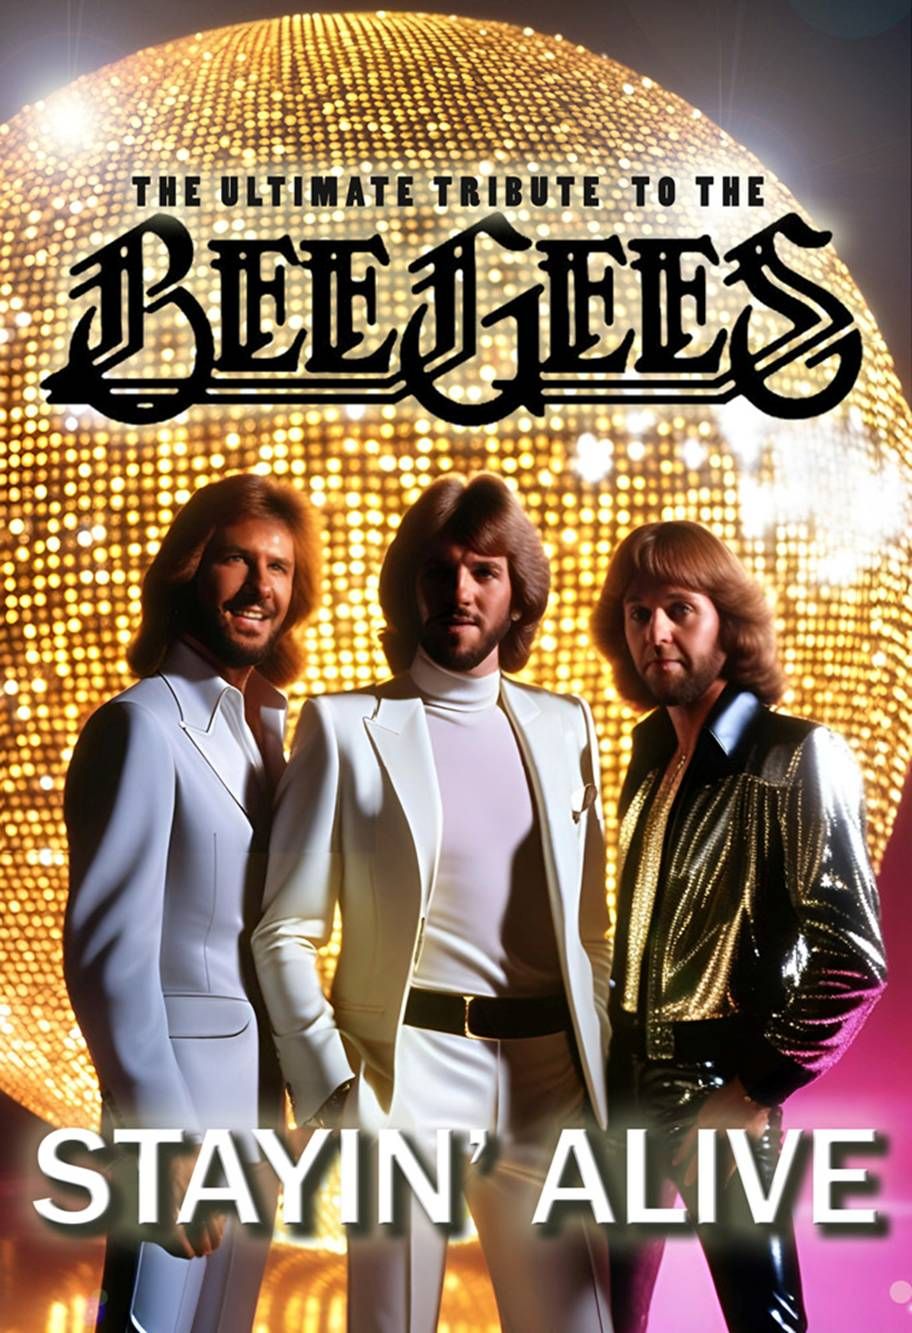 Stayin Alive - Bee Gees Tribute 